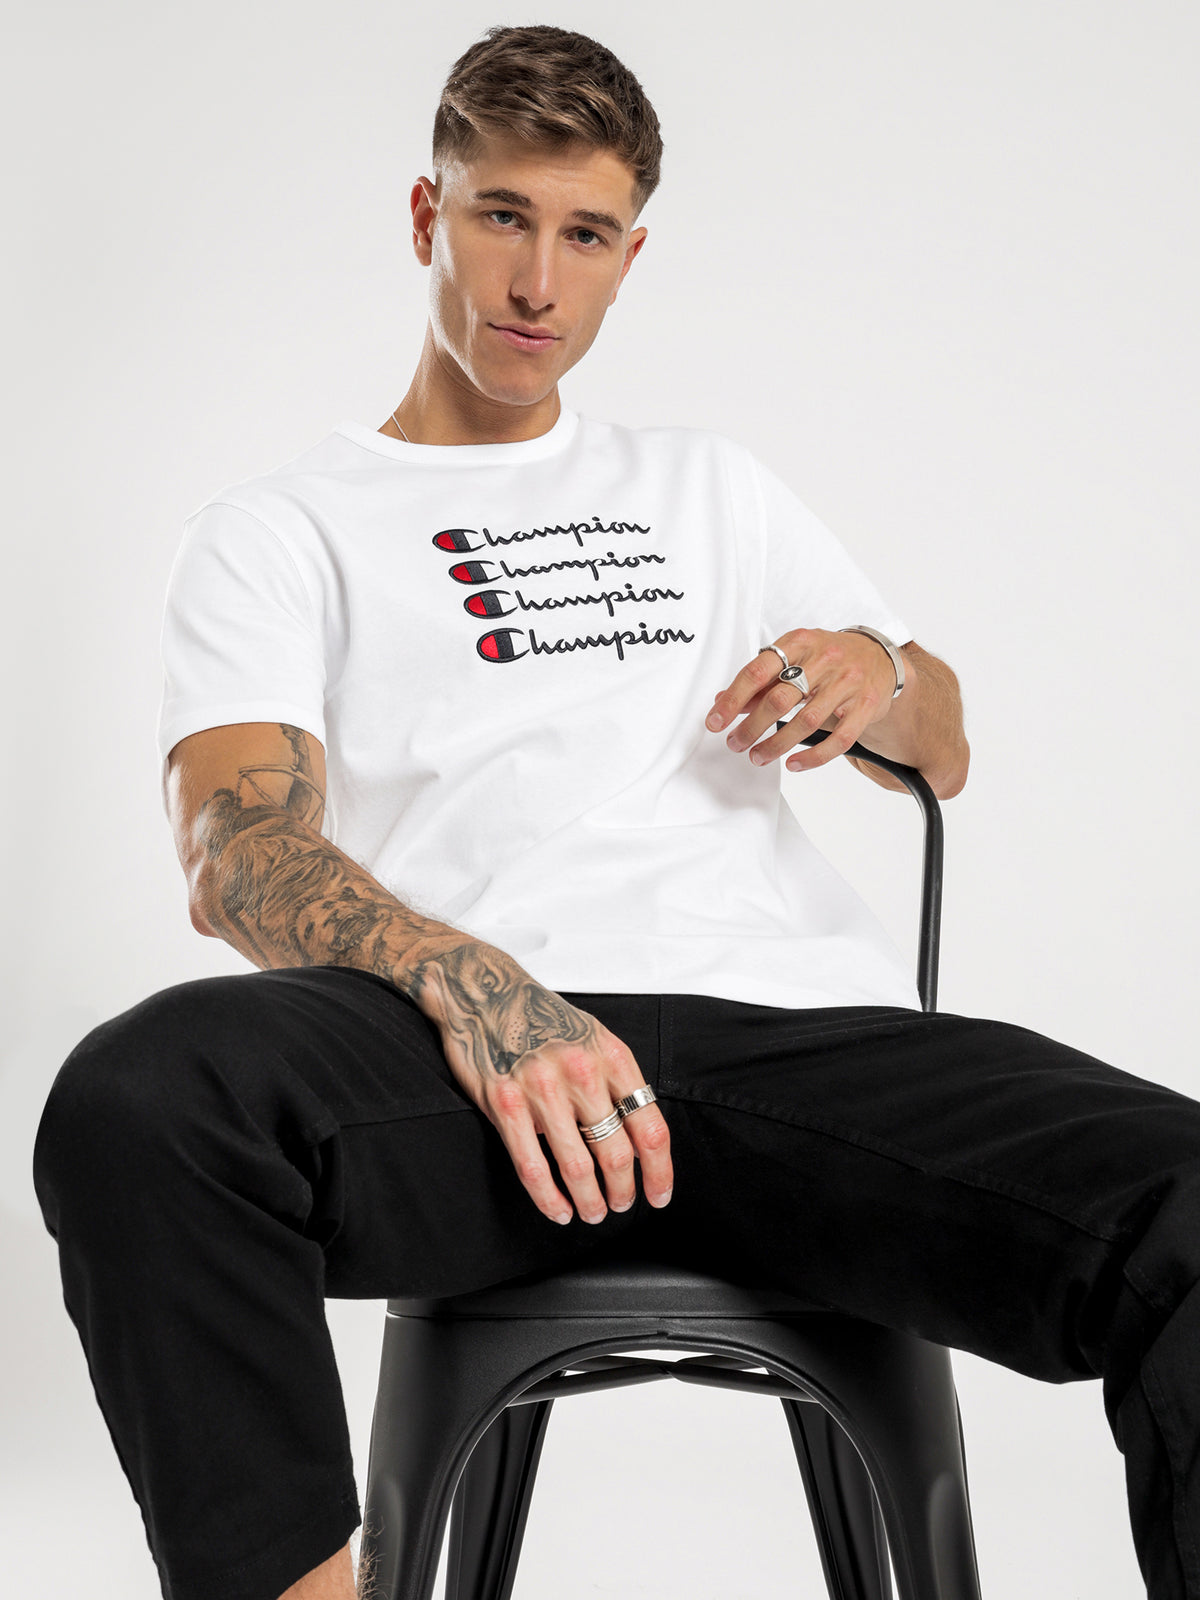 Heritage Graphic T-Shirt in White